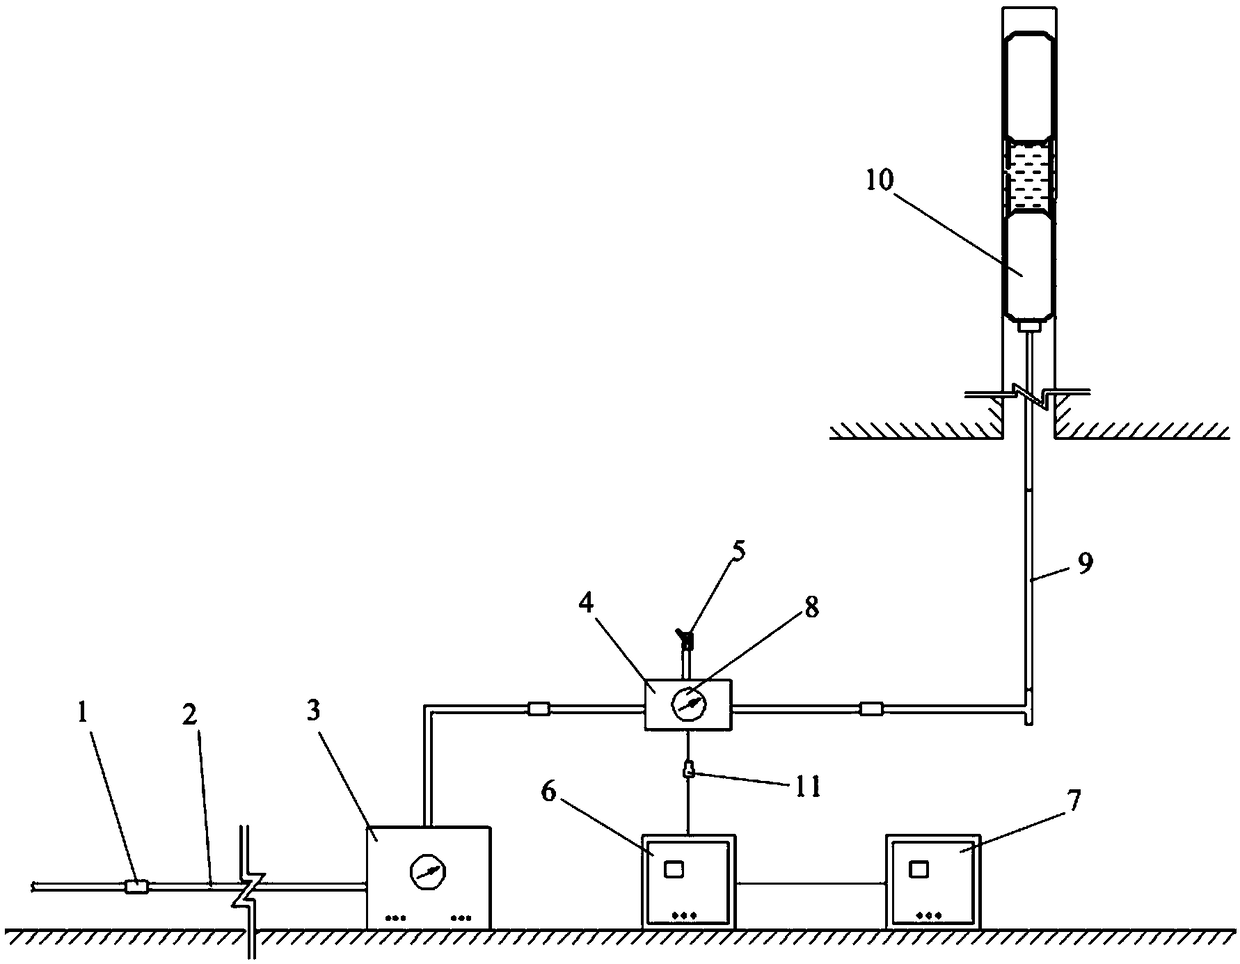 Method for testing crustal stress of coal rock mass by hydraulic fracturing